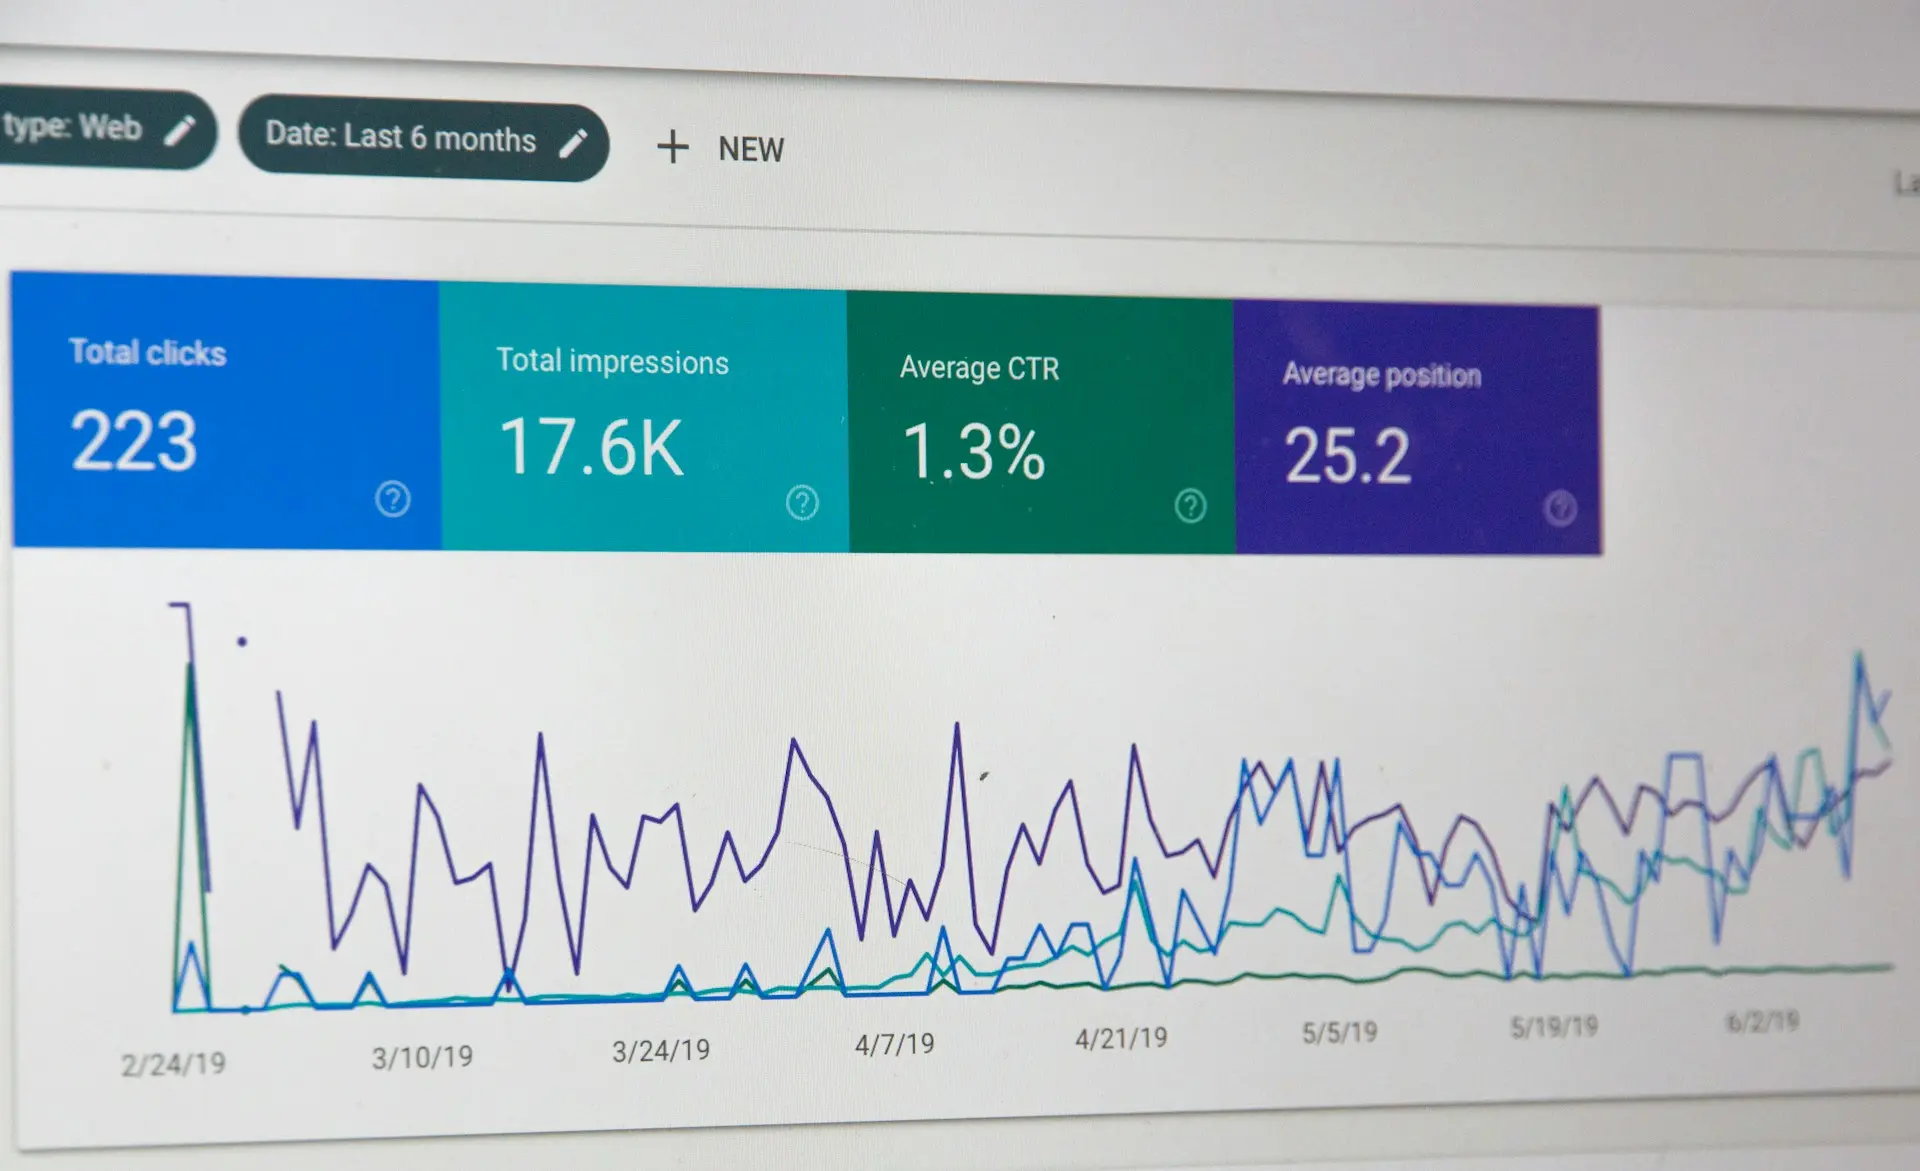 A screenshot of a website's Google Search Console and their SEO analytics